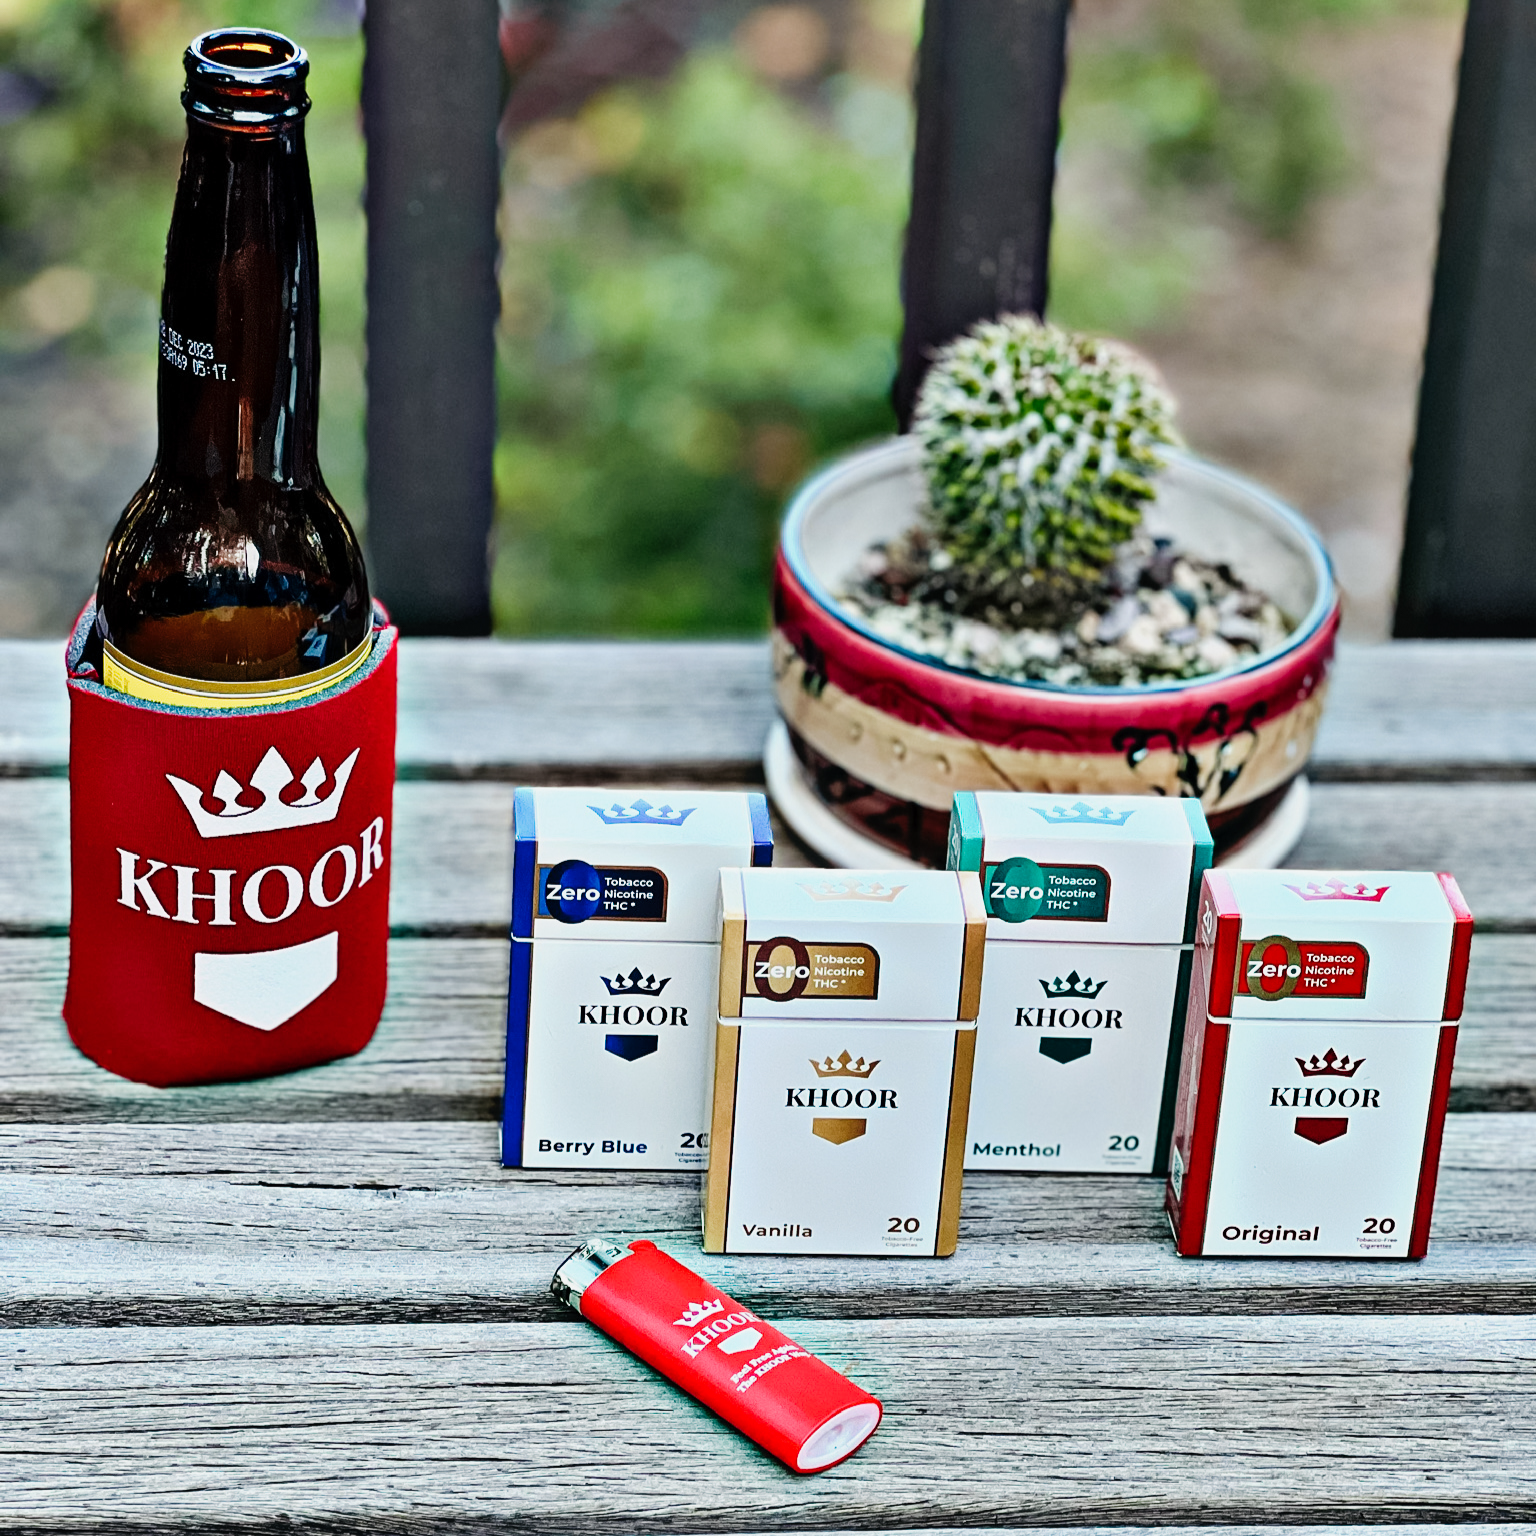 Tobacco-free smoking products